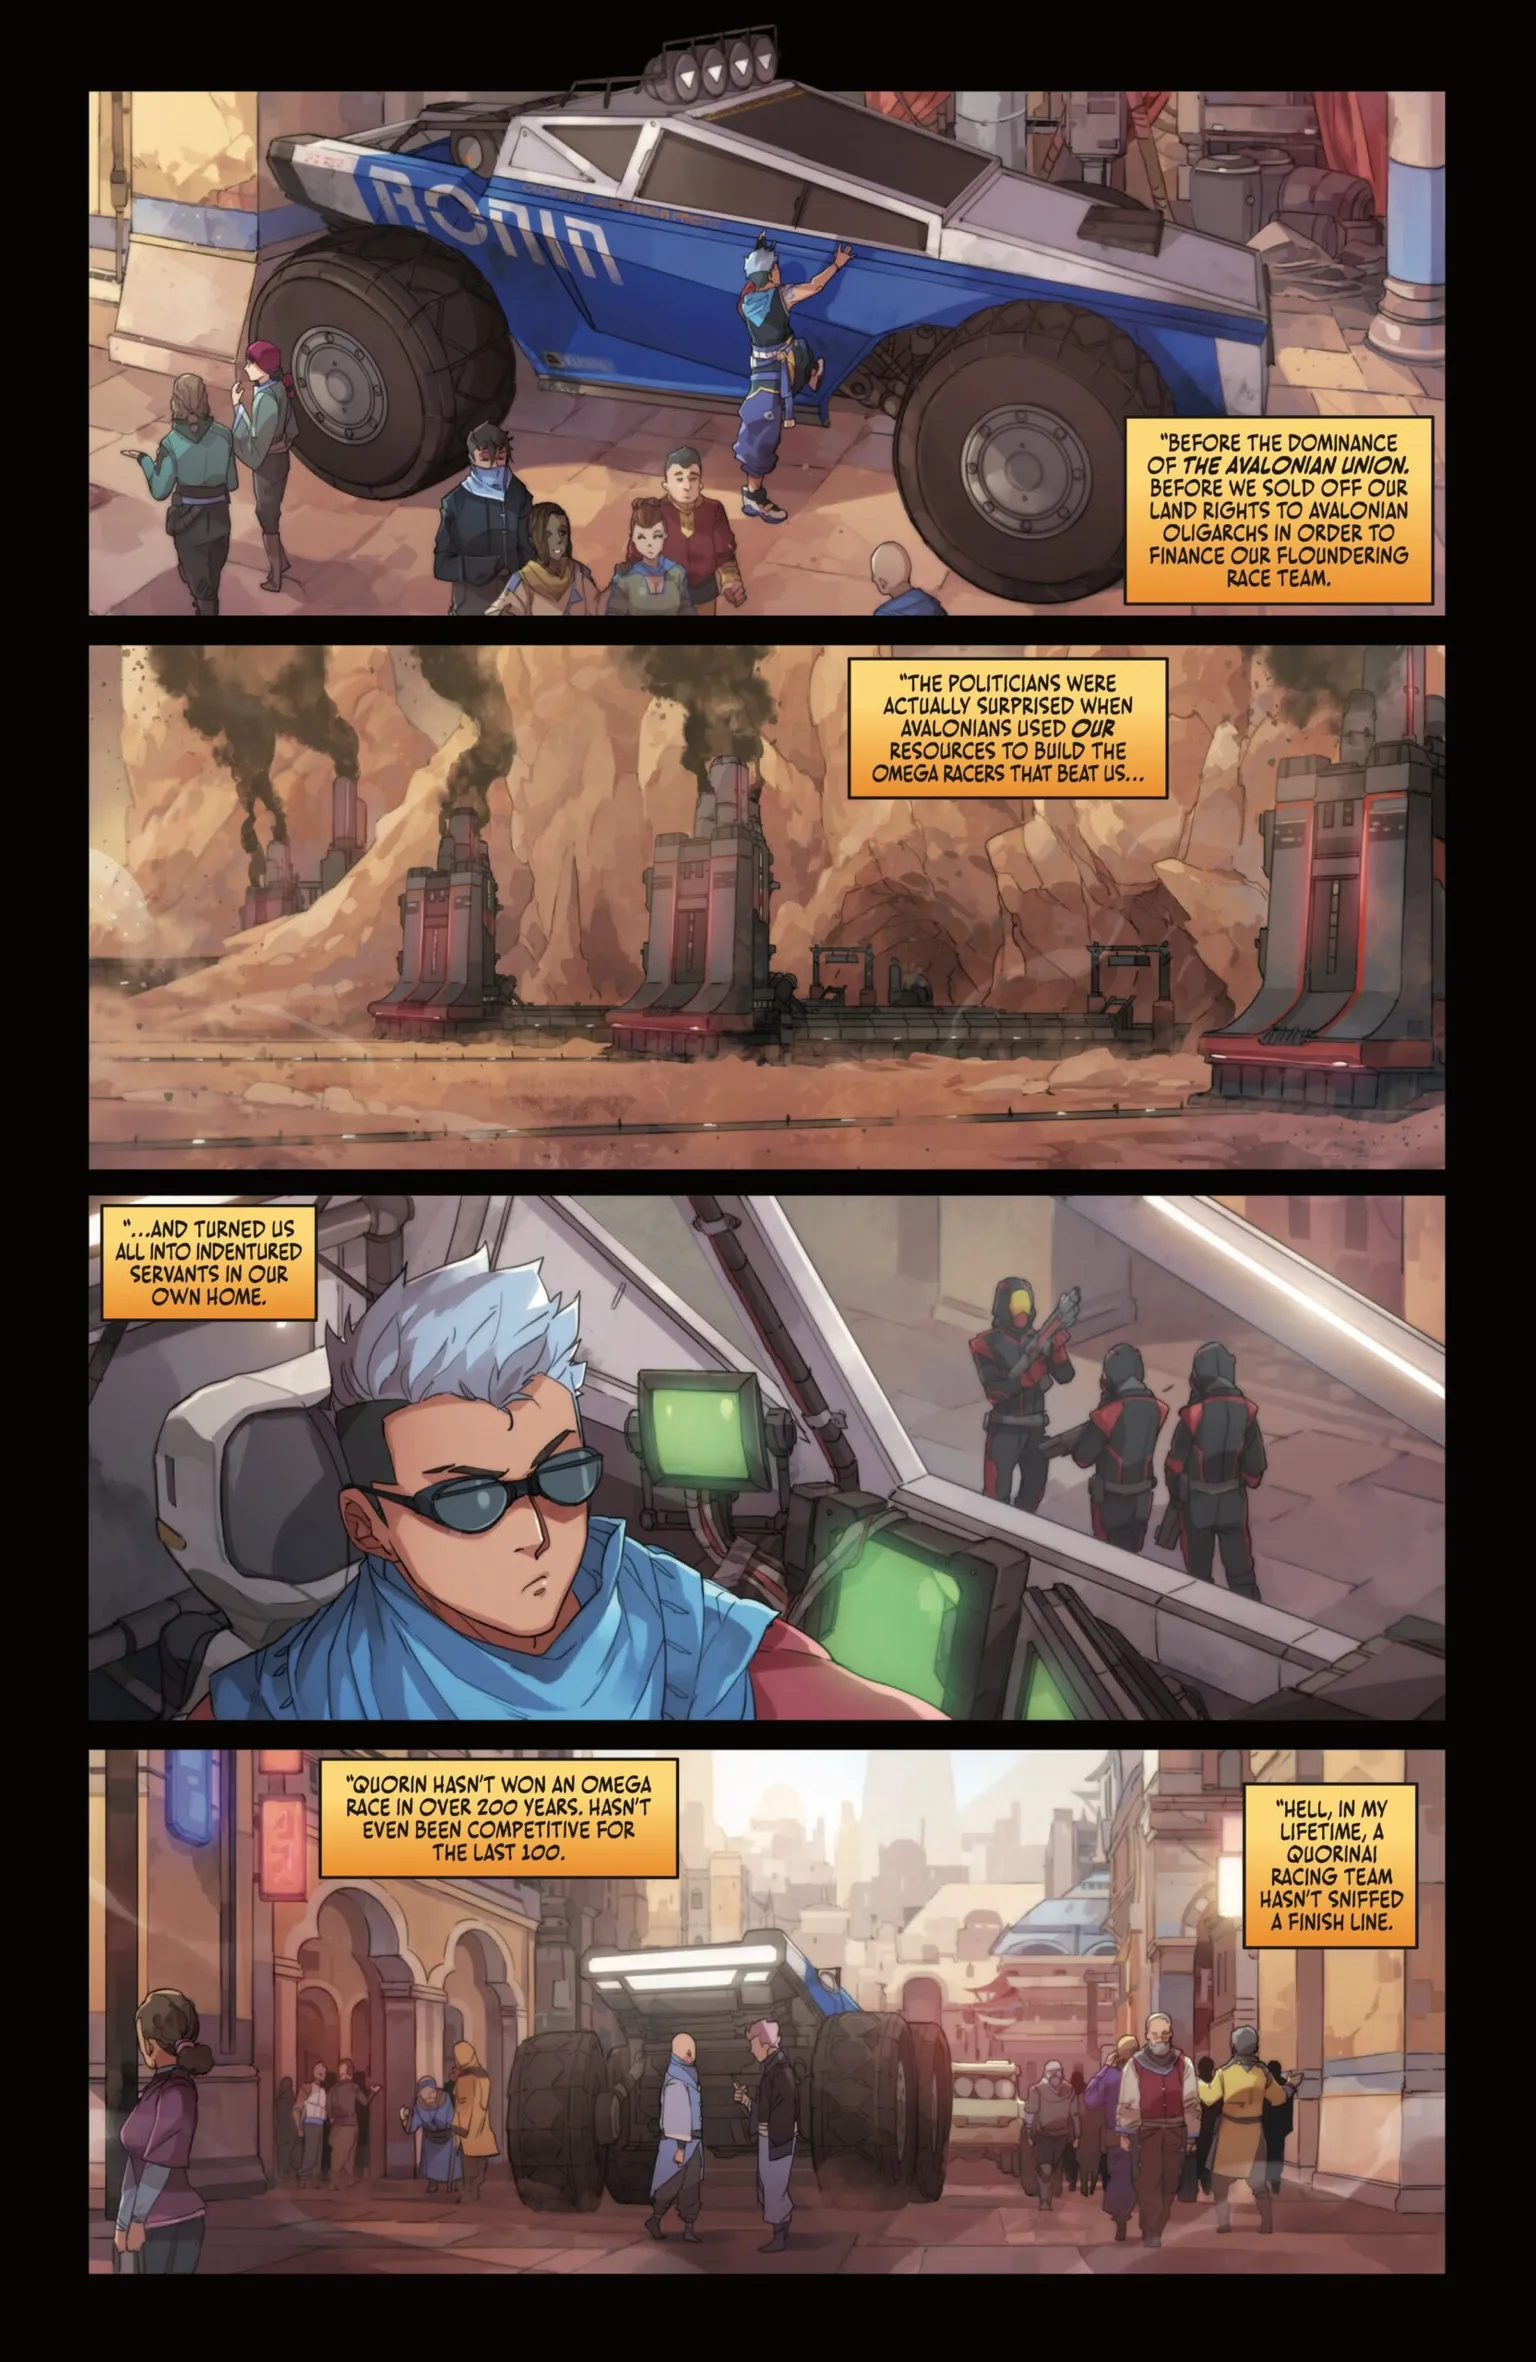 4 panels of comic book page, showing vehicle in a dusty, industrial town.